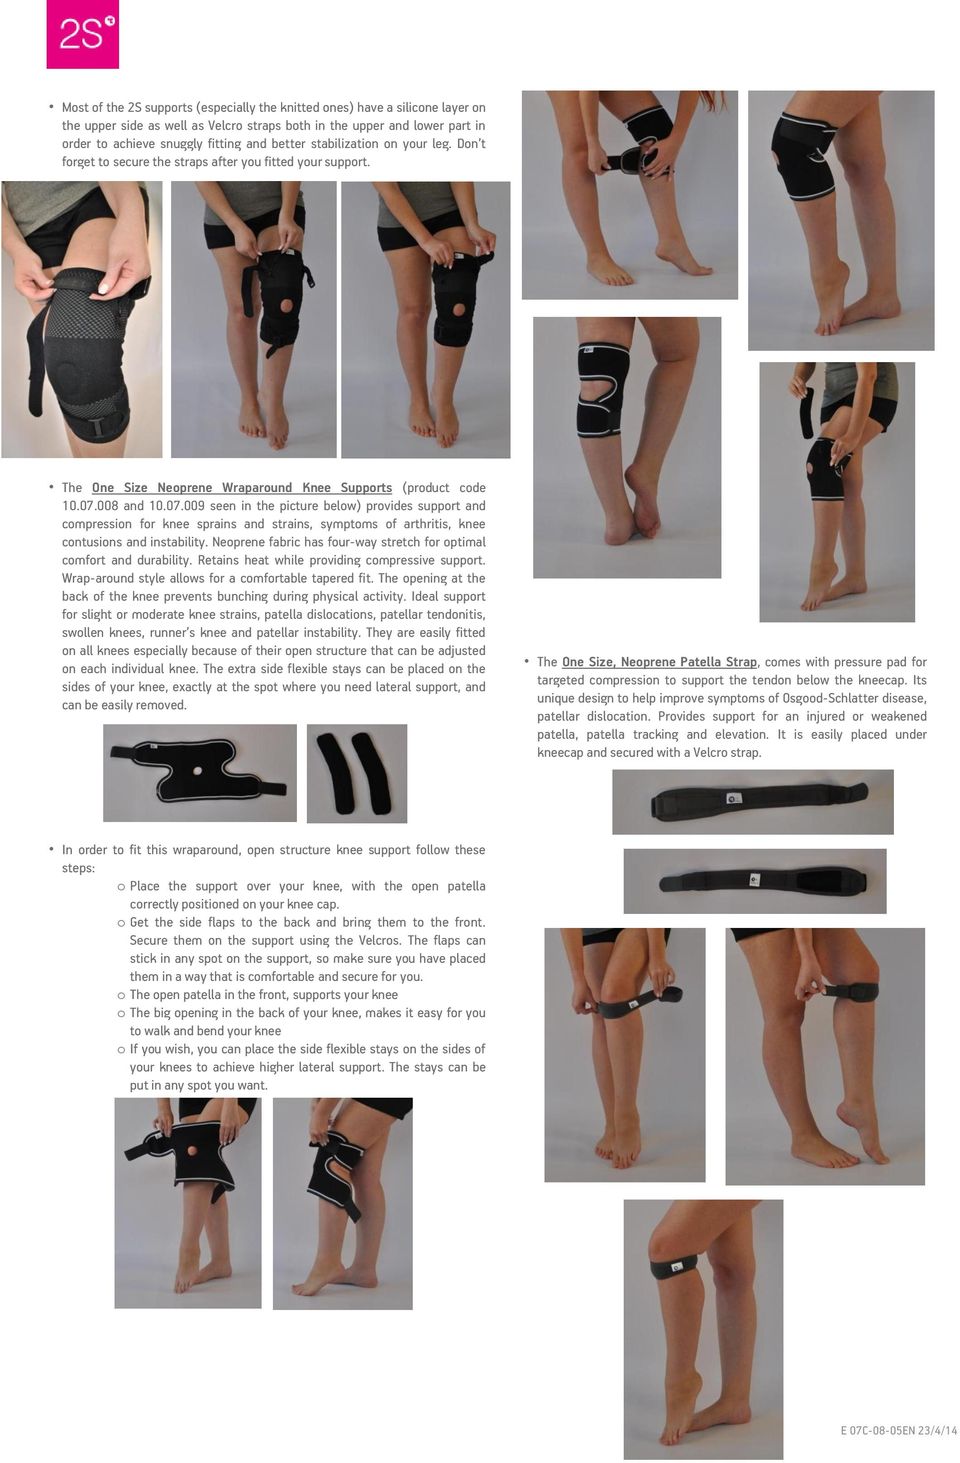 008 and 10.07.009 seen in the picture below) provides support and compression for knee sprains and strains, symptoms of arthritis, knee contusions and instability.